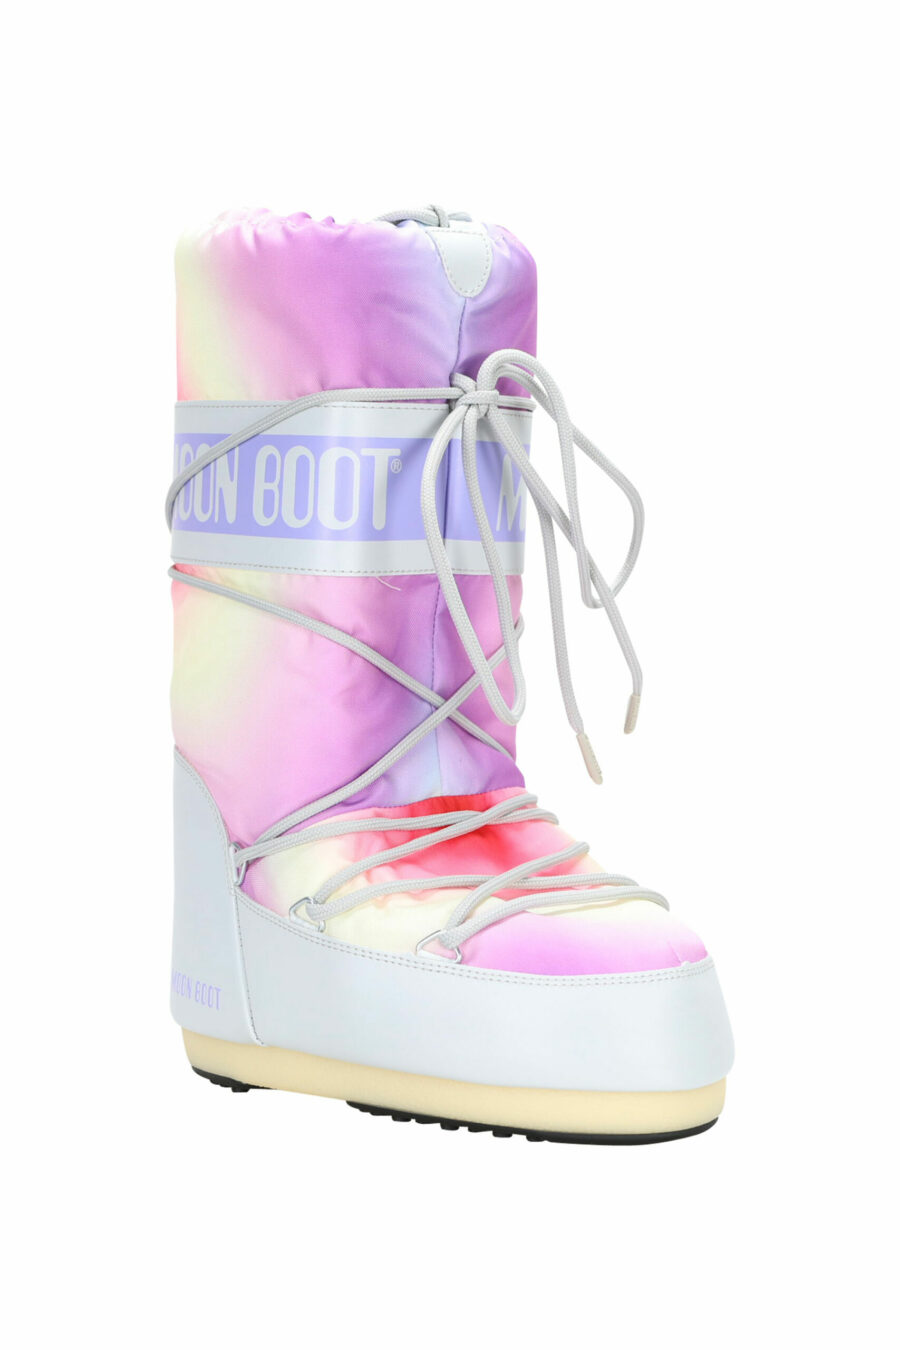 Grey multicoloured tie dye snow boots with logo - 8050032019787 1 scaled